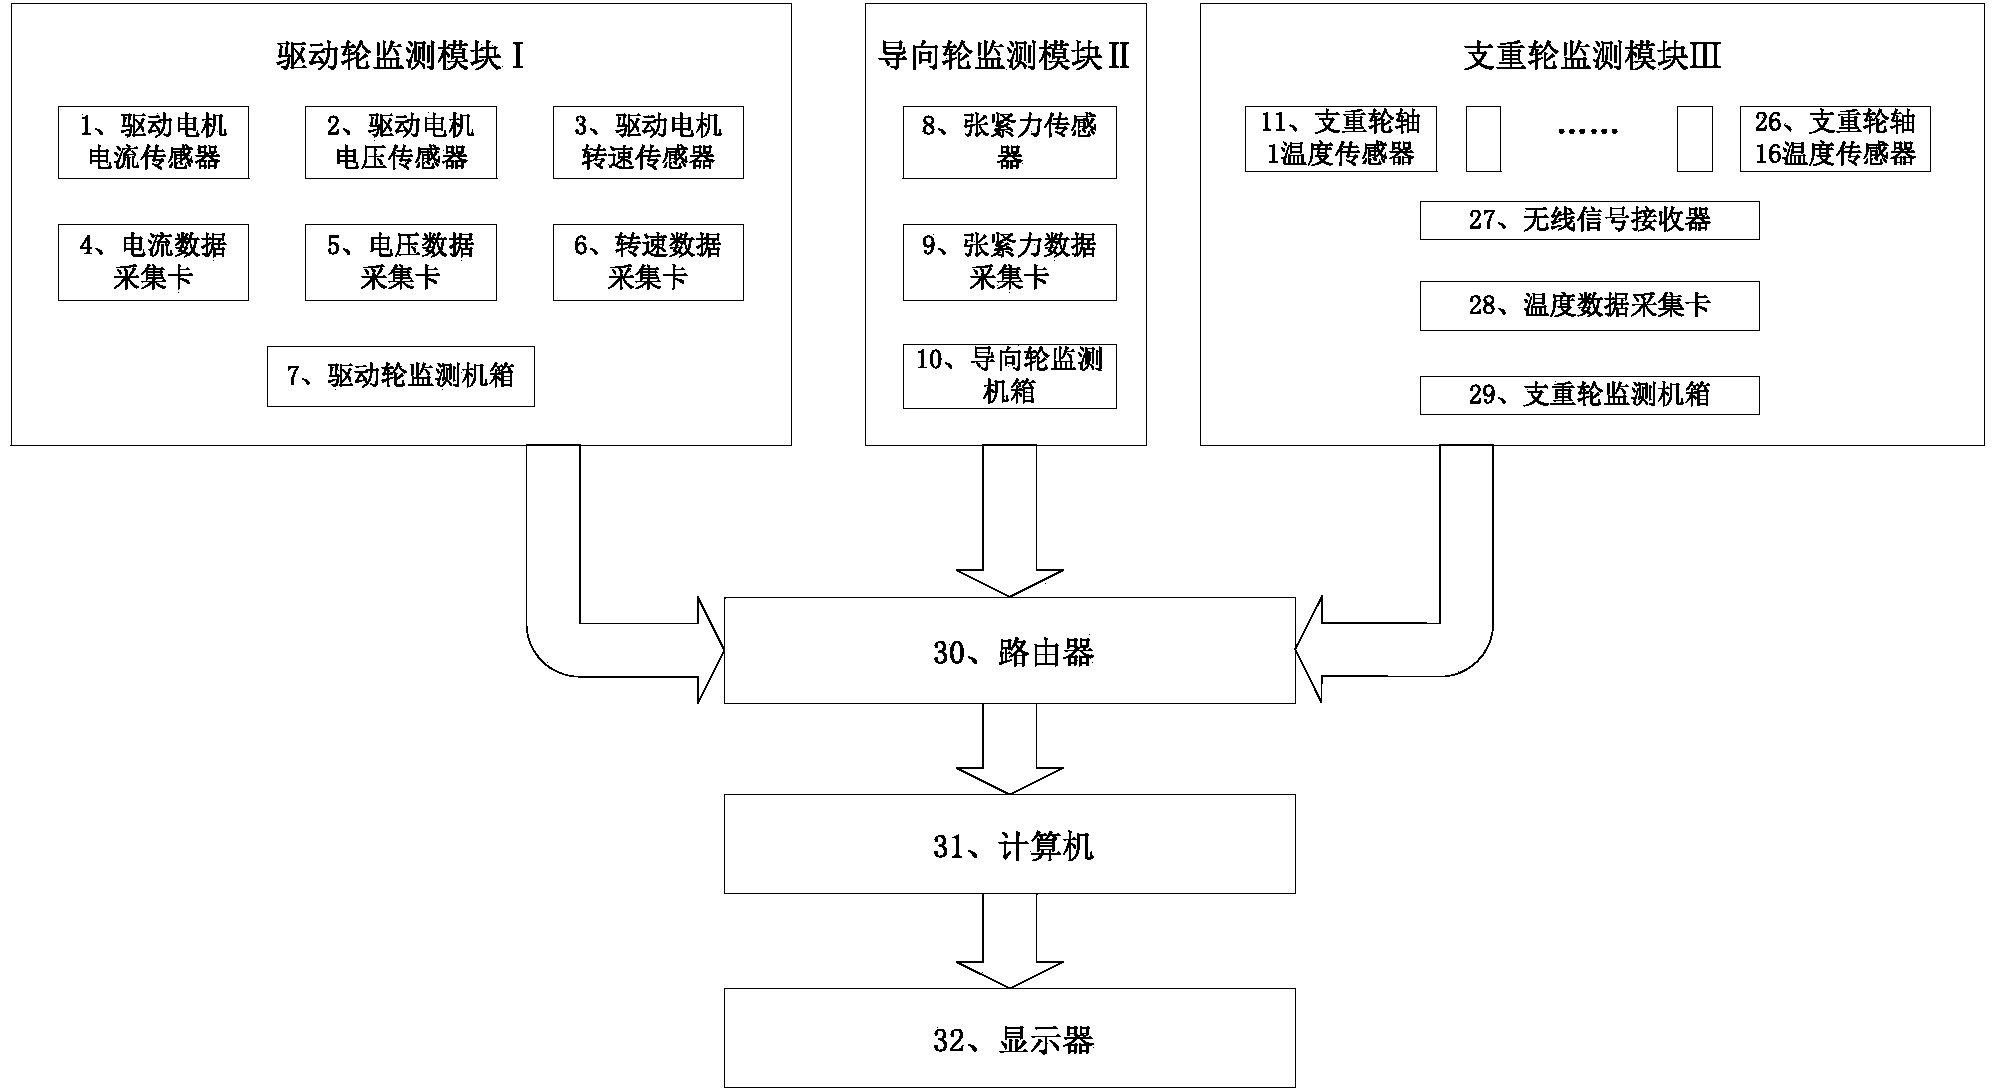 LabVIEW-based health state intelligent monitoring system and method for large track traveling device